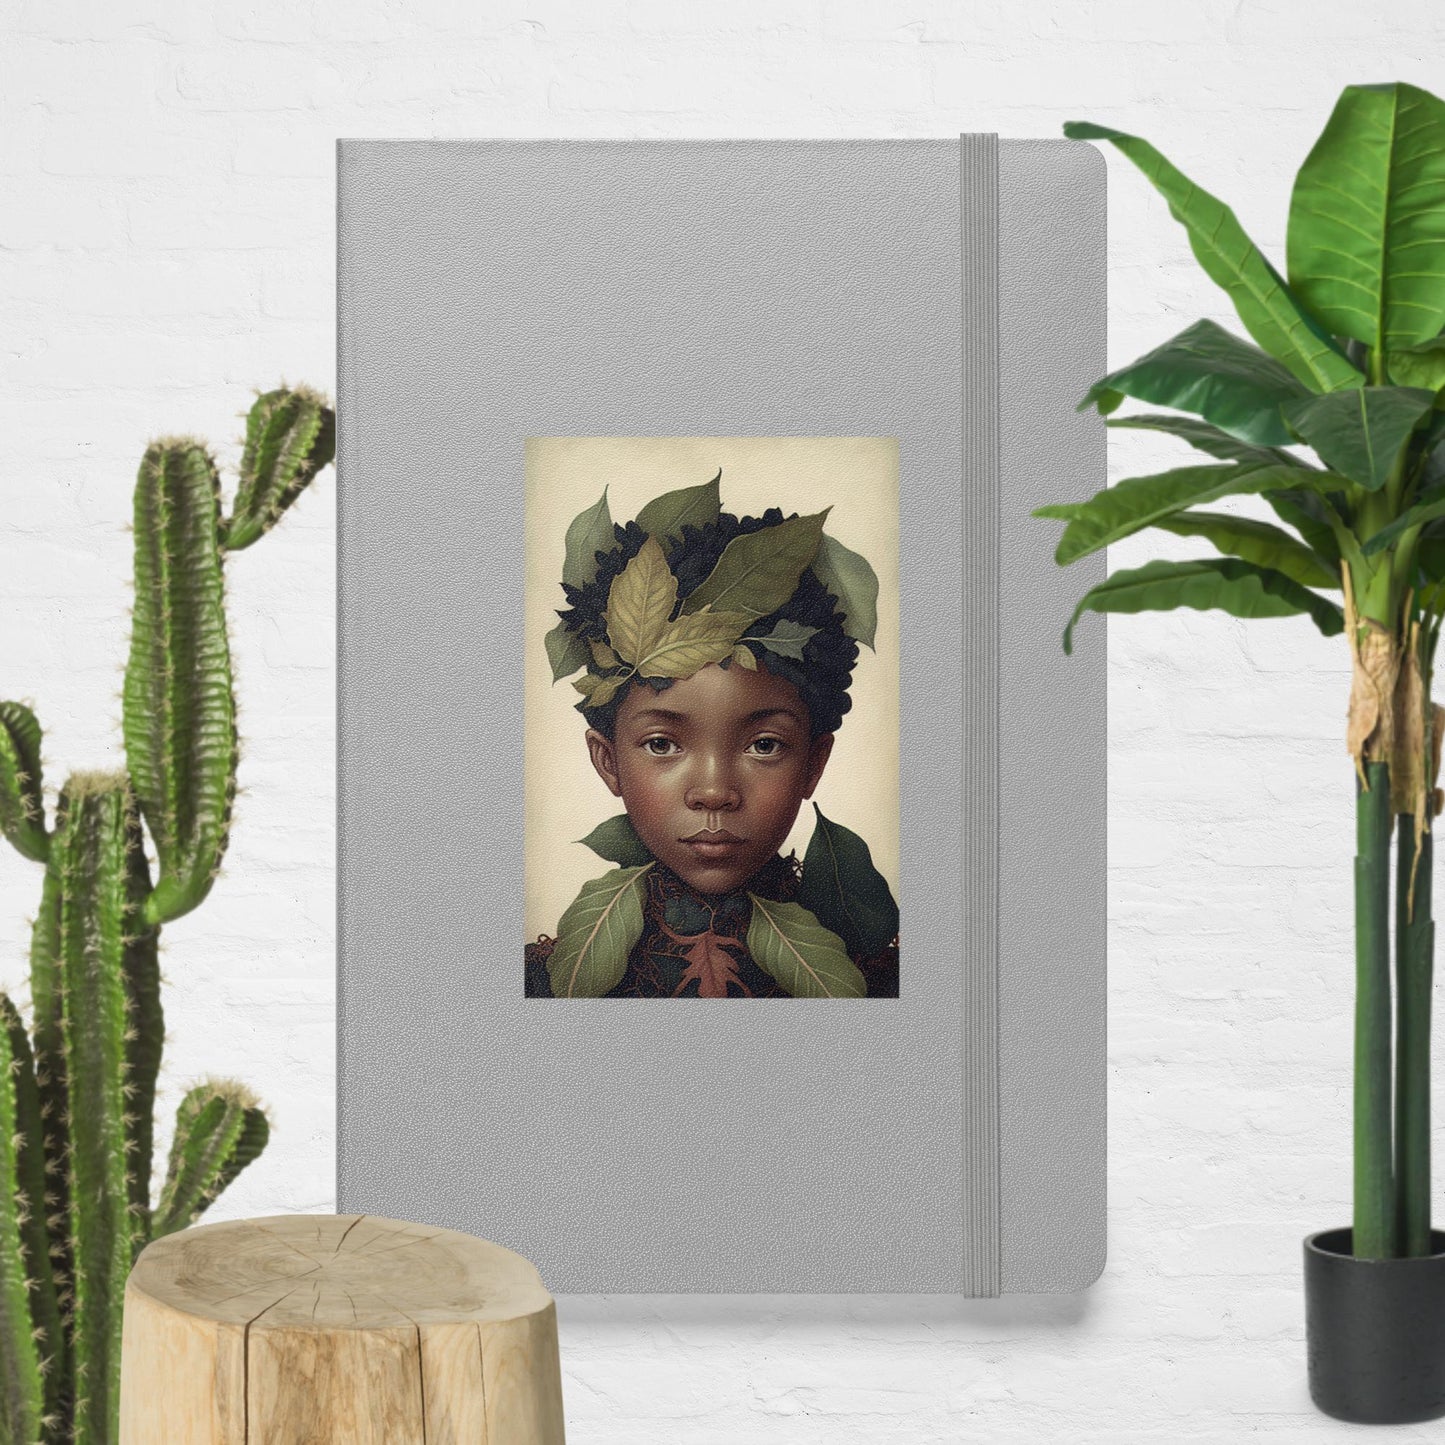 Hardcover bound notebook young boy